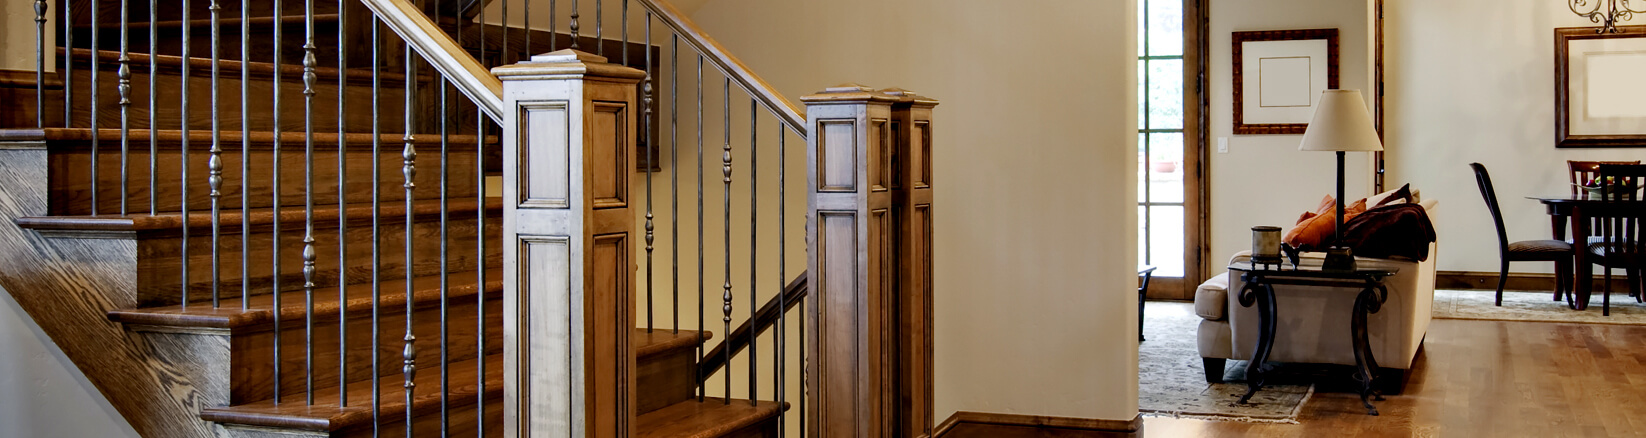 a narrow image of brown floors of a stairwell, landing and bannister